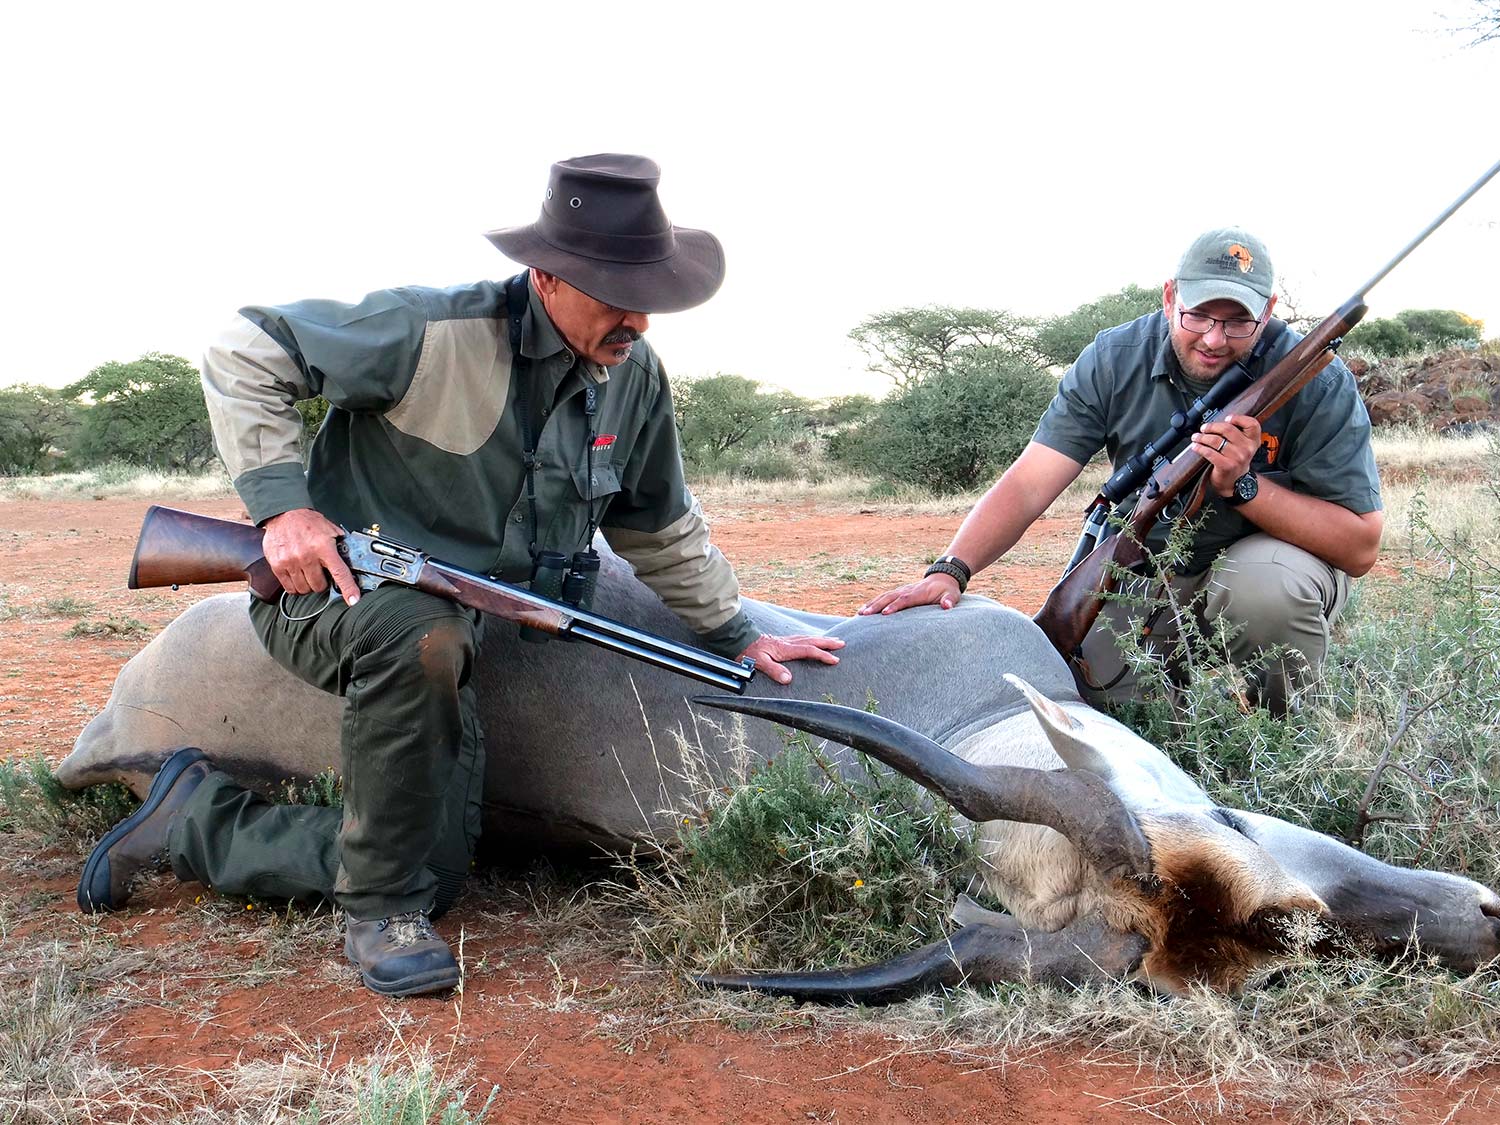 Two male hunters kneeling next to a downed pronghorn while holding rifles.